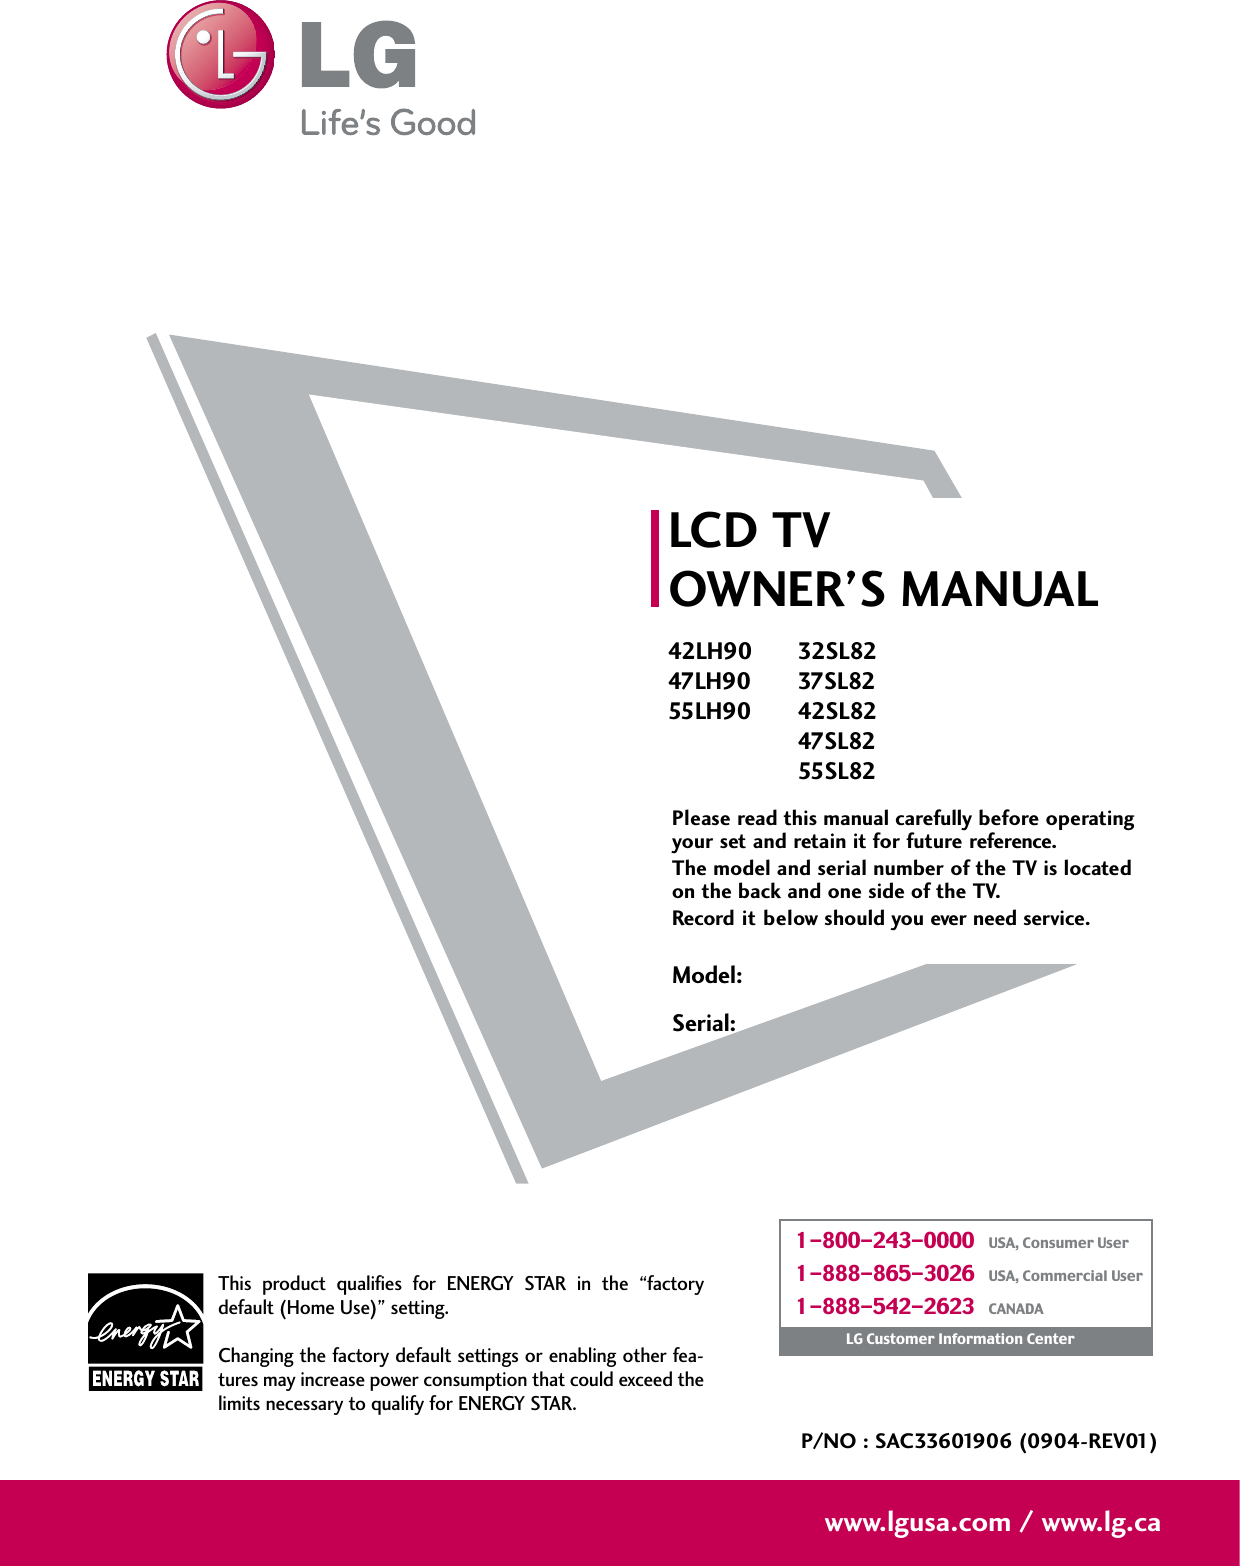 Please read this manual carefully before operatingyour set and retain it for future reference.The model and serial number of the TV is locatedon the back and one side of the TV. Record it below should you ever need service.LCD TVOWNER’S MANUAL42LH9047LH9055LH90P/NO : SAC33601906 (0904-REV01)www.lgusa.com / www.lg.caThis  product  qualifies  for  ENERGY  STAR  in  the  “factorydefault (Home Use)” setting.Changing the factory default settings or enabling other fea-tures may increase power consumption that could exceed thelimits necessary to qualify for ENERGY STAR.Model:Serial:1-800-243-0000   USA, Consumer User1-888-865-3026   USA, Commercial User1-888-542-2623   CANADALG Customer Information Center32SL8237SL8242SL8247SL8255SL82